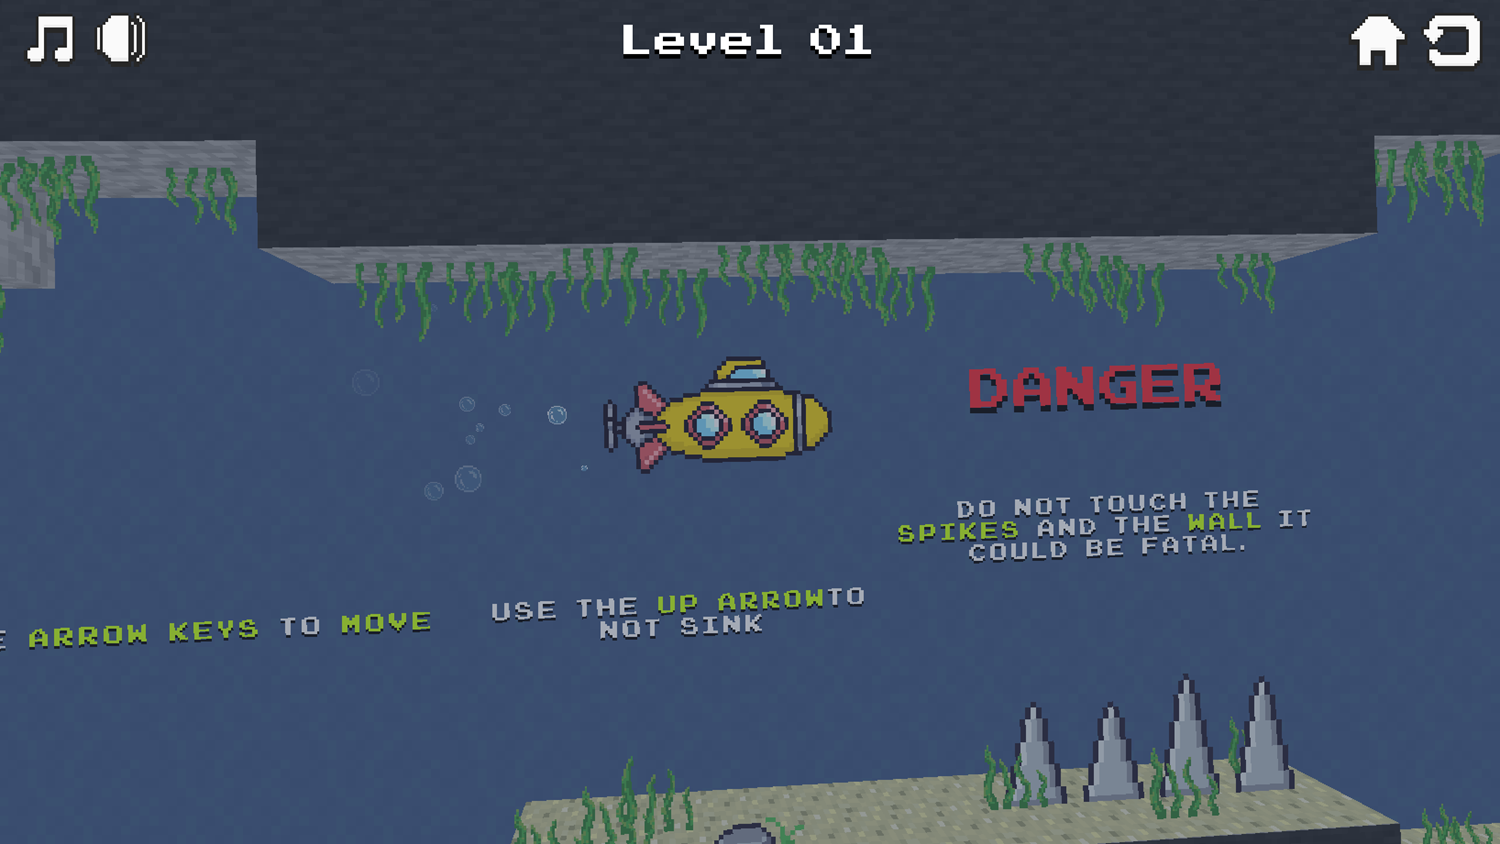 Submerged Escape Game Instructions Screen Screenshot.